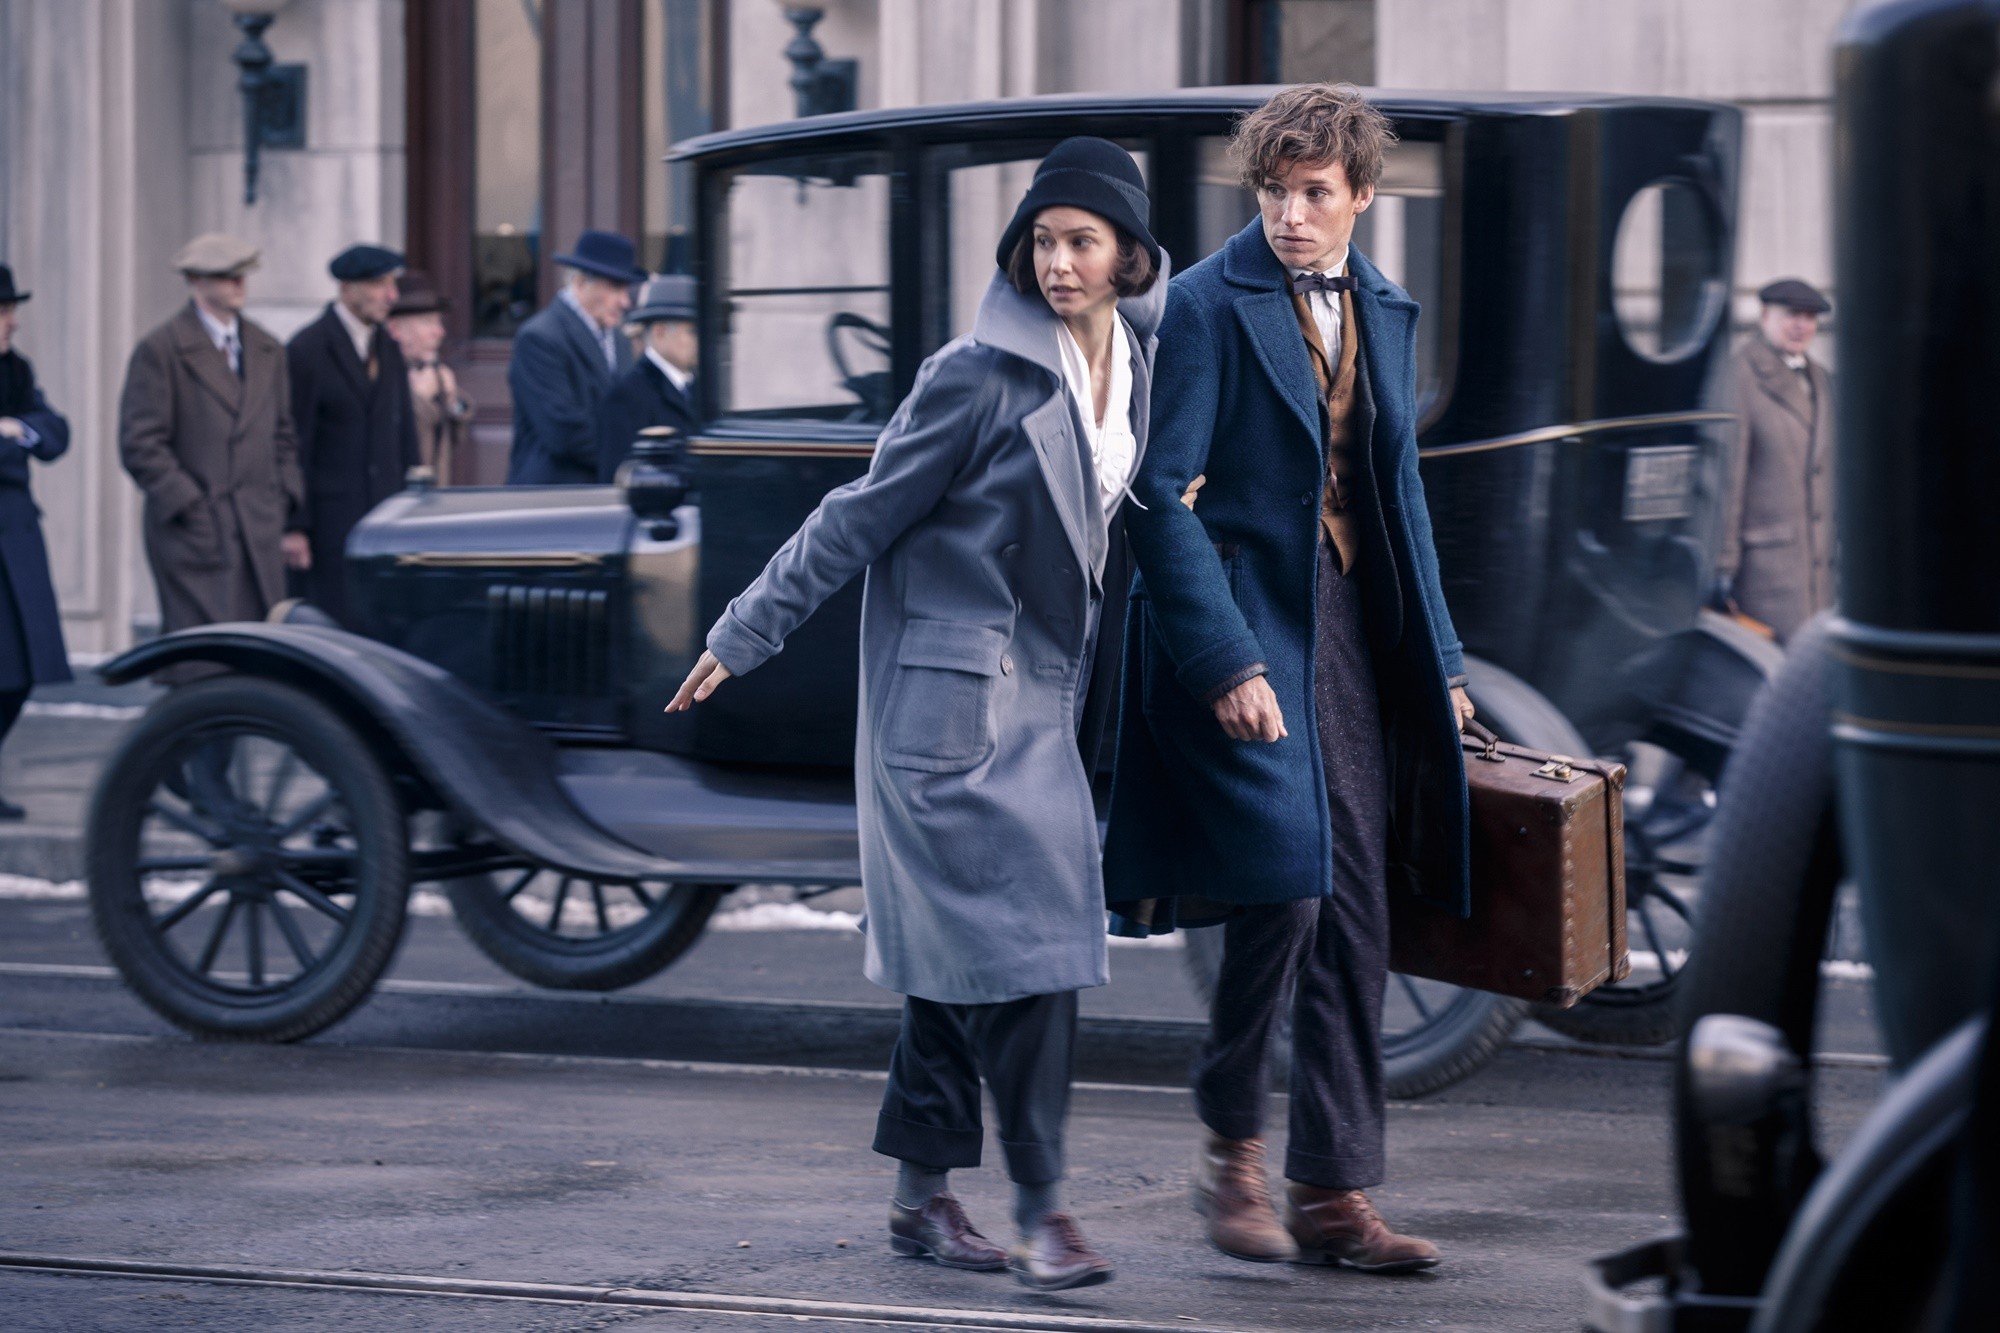 Katherine Waterston stars as Porpentina Goldstein and Eddie Redmayne stars as Newt Scamander in Warner Bros. Pictures' Fantastic Beasts and Where to Find Them (2016)